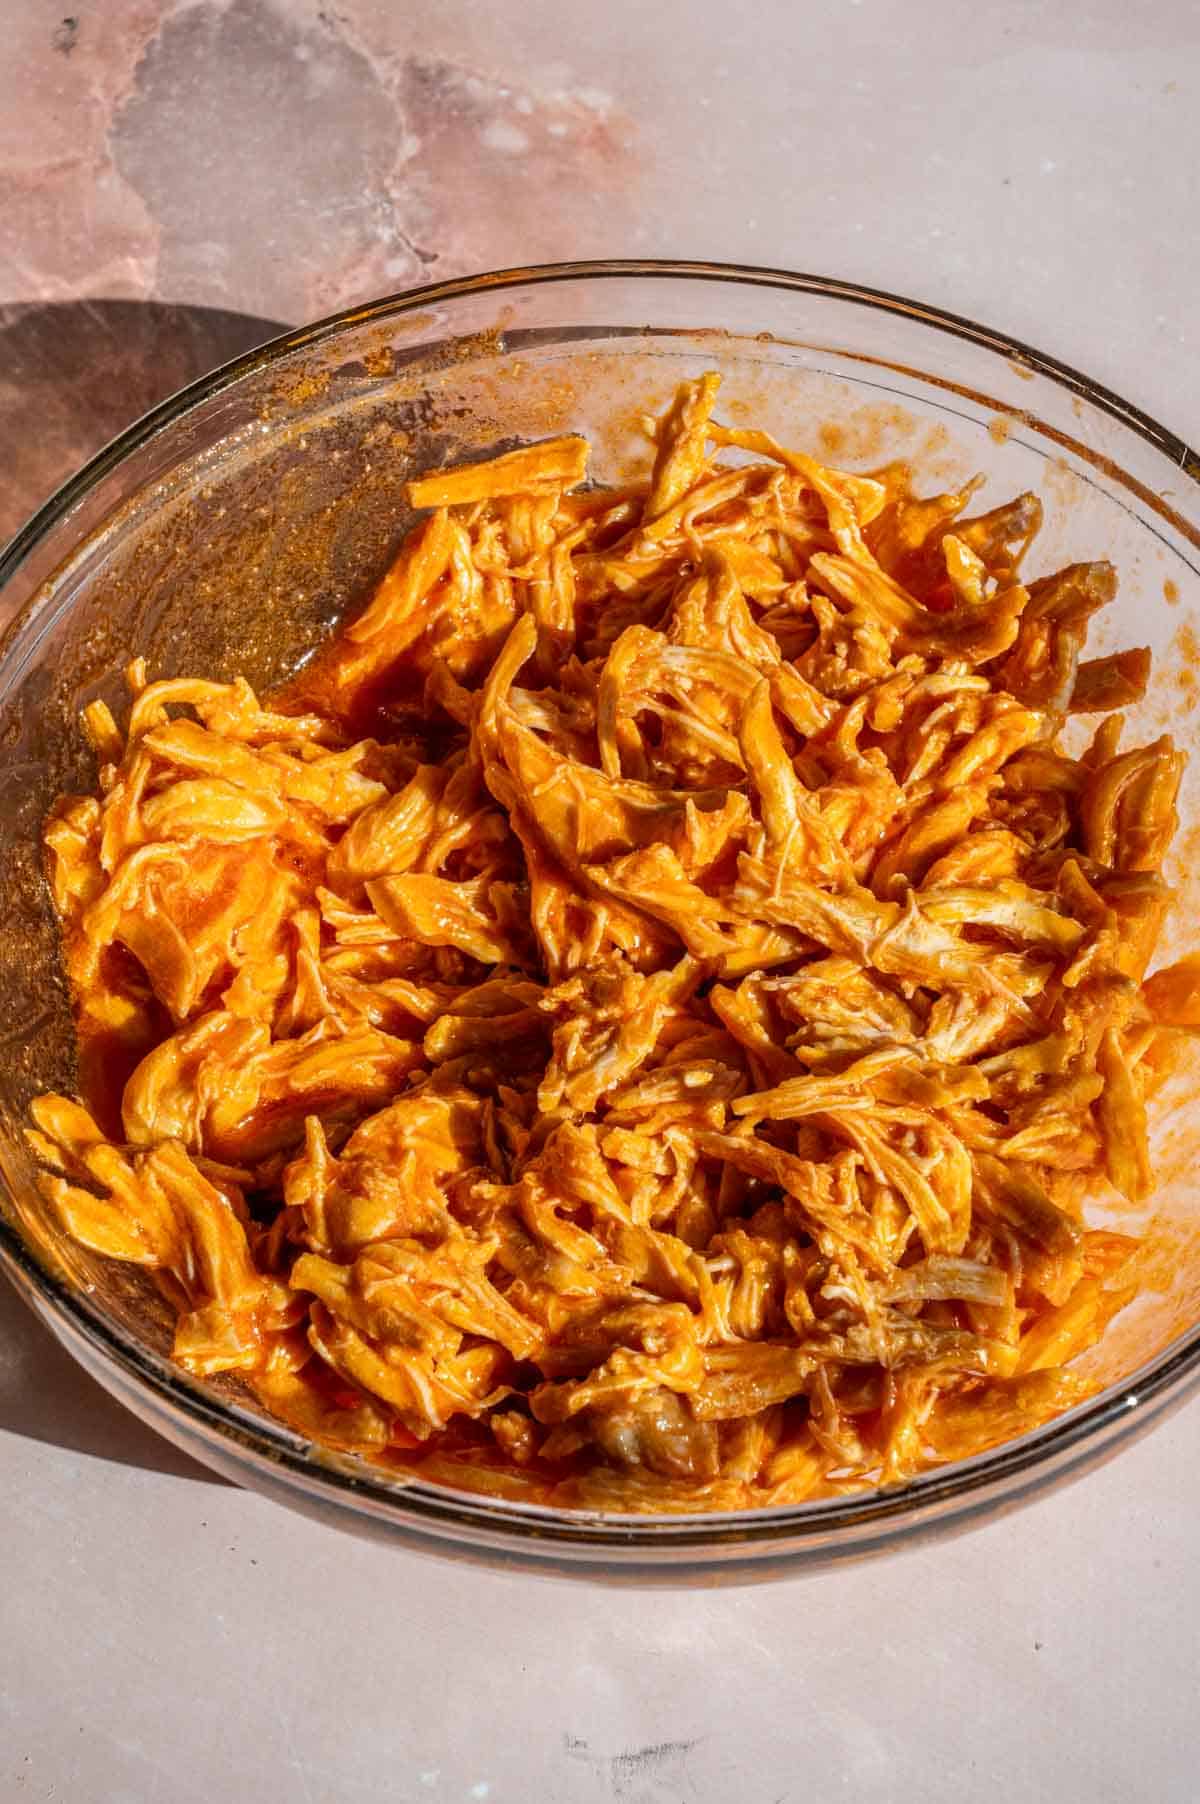 The chicken tossed with the buffalo sauce in a glass bowl.